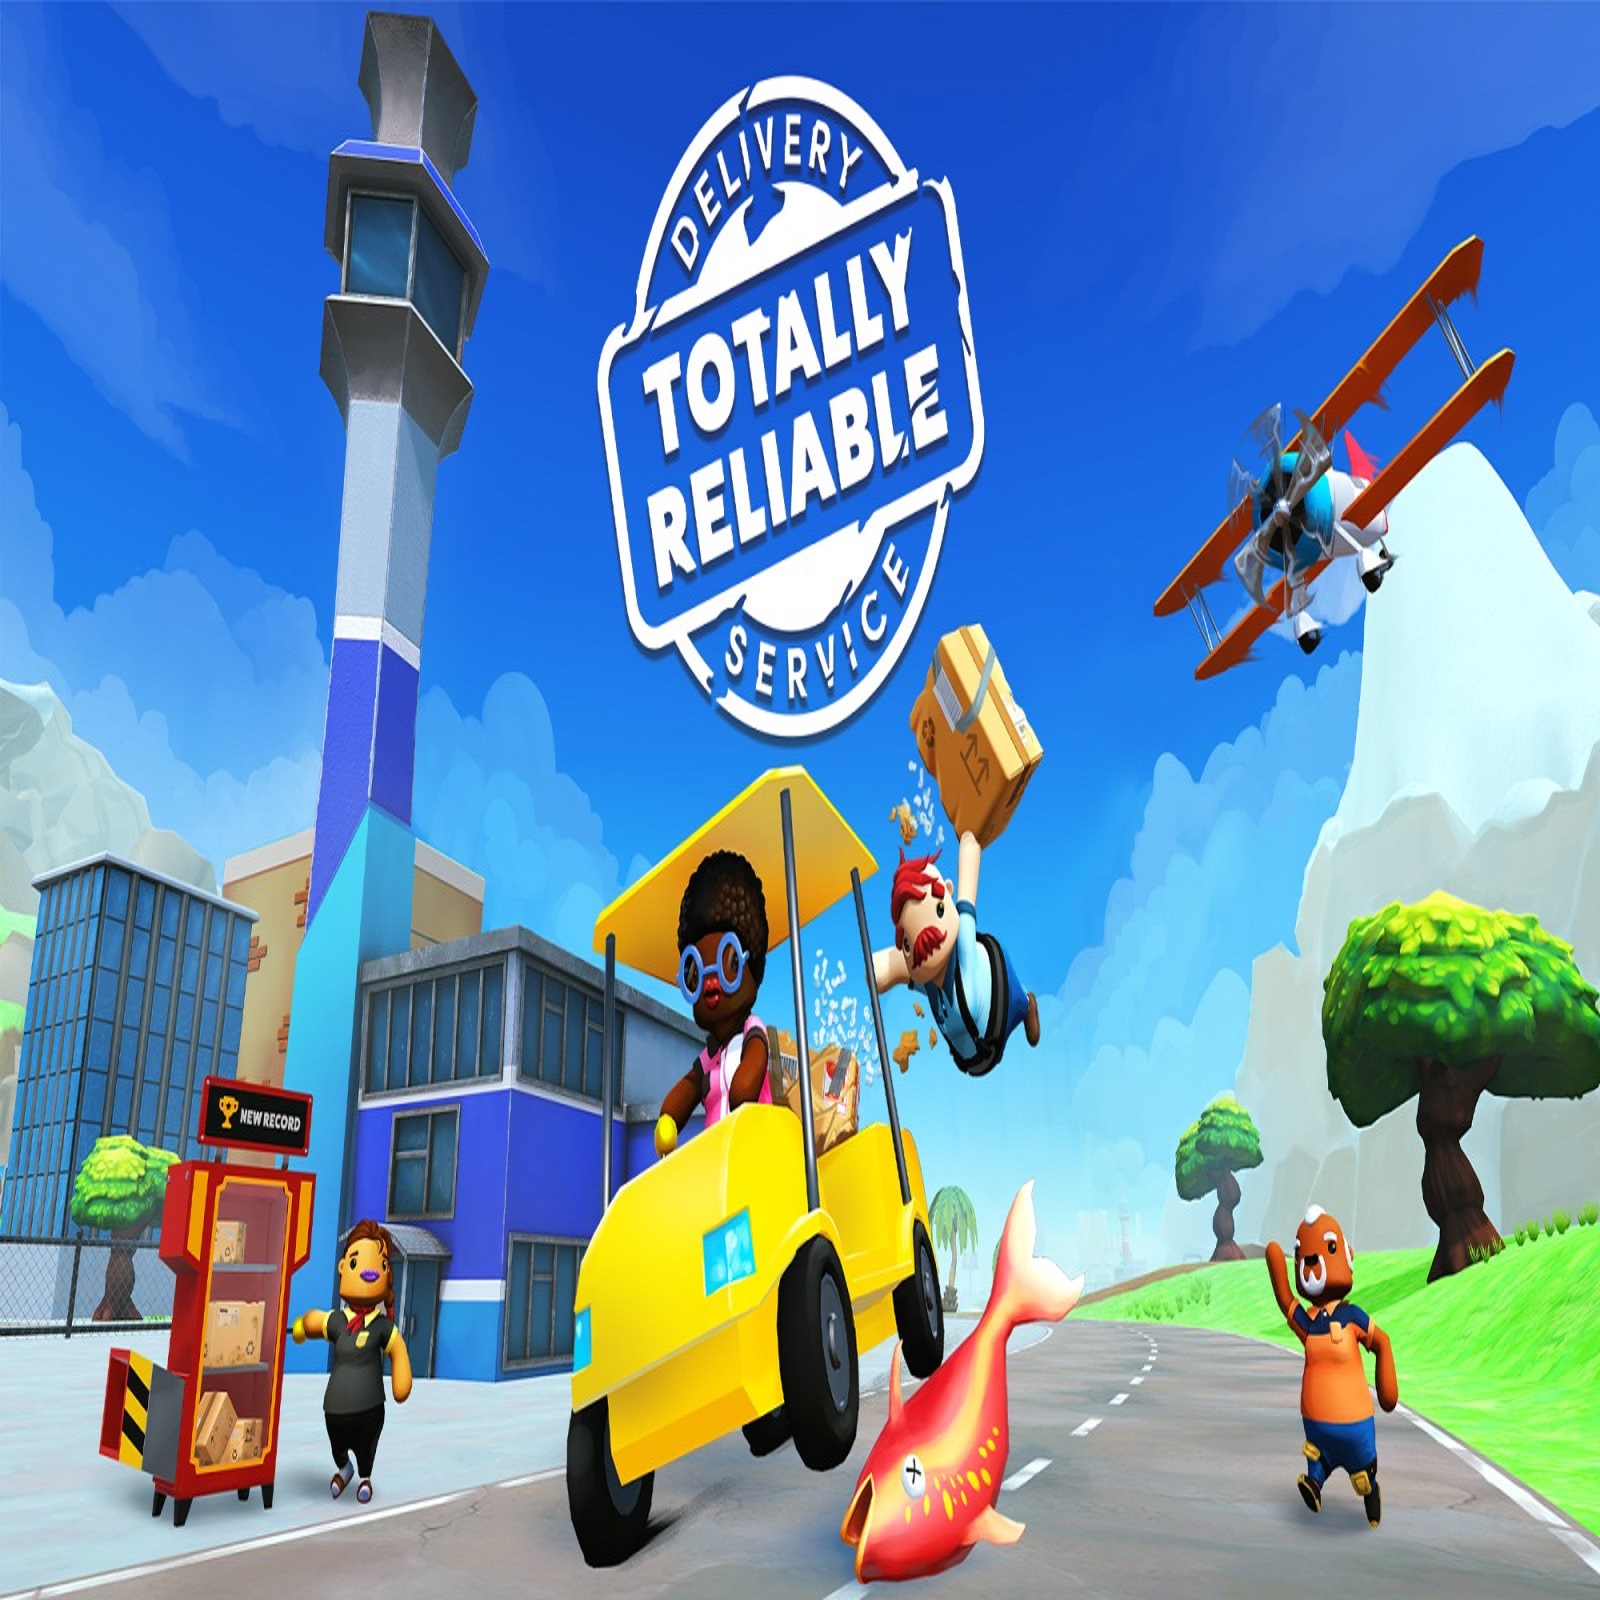 Totally reliable delivery service steam фото 19